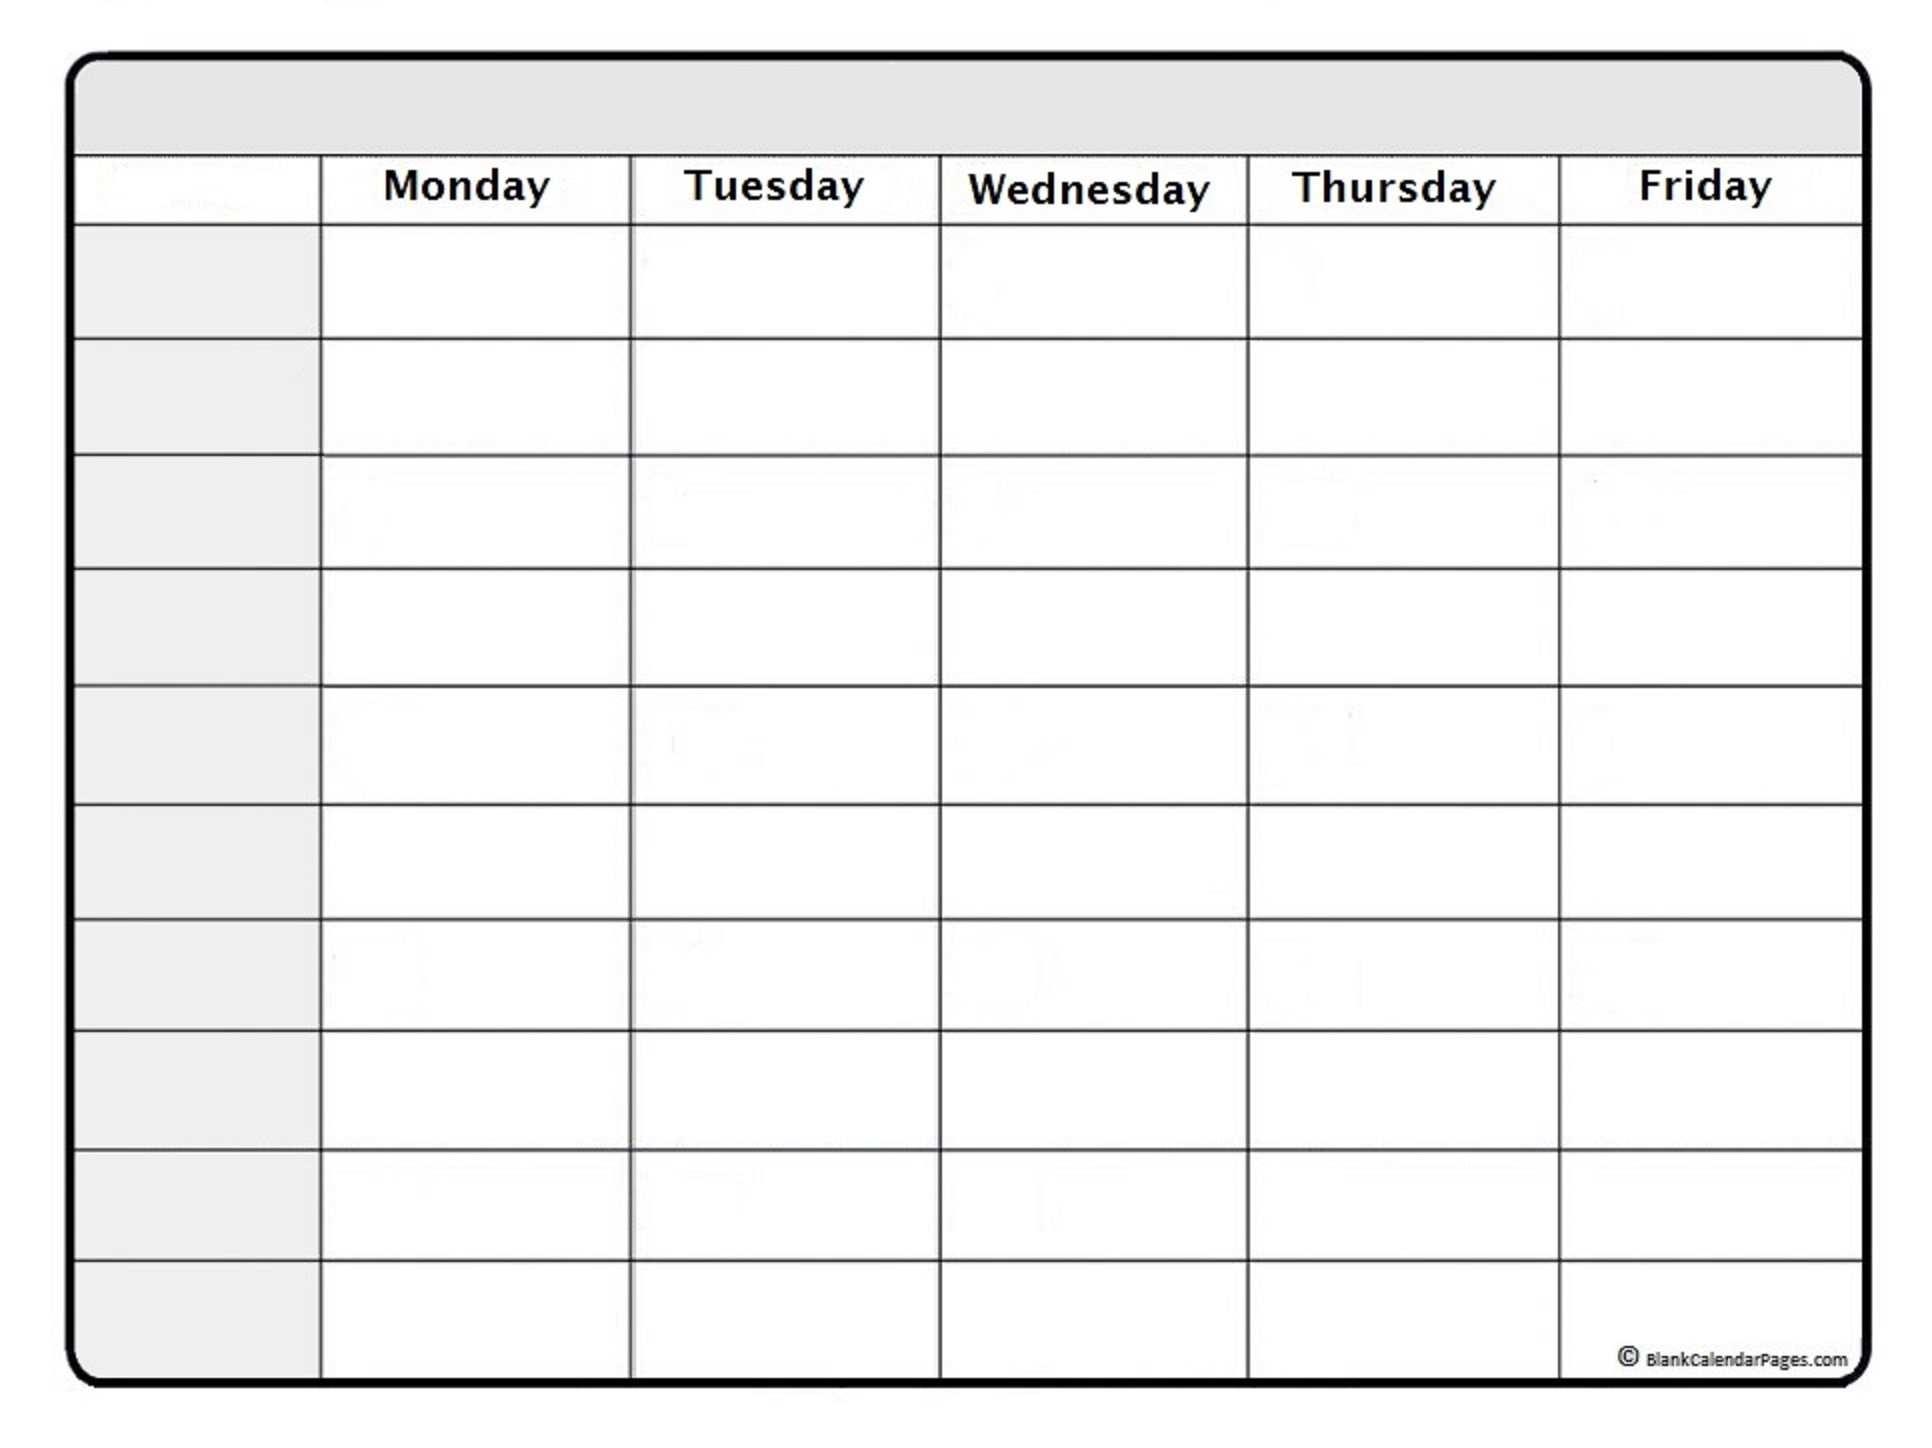 January 2021 Weekly Calendar | January 2021 Weekly Calendar-Printable Calendar 2021 With Hourly Appointment Blocks